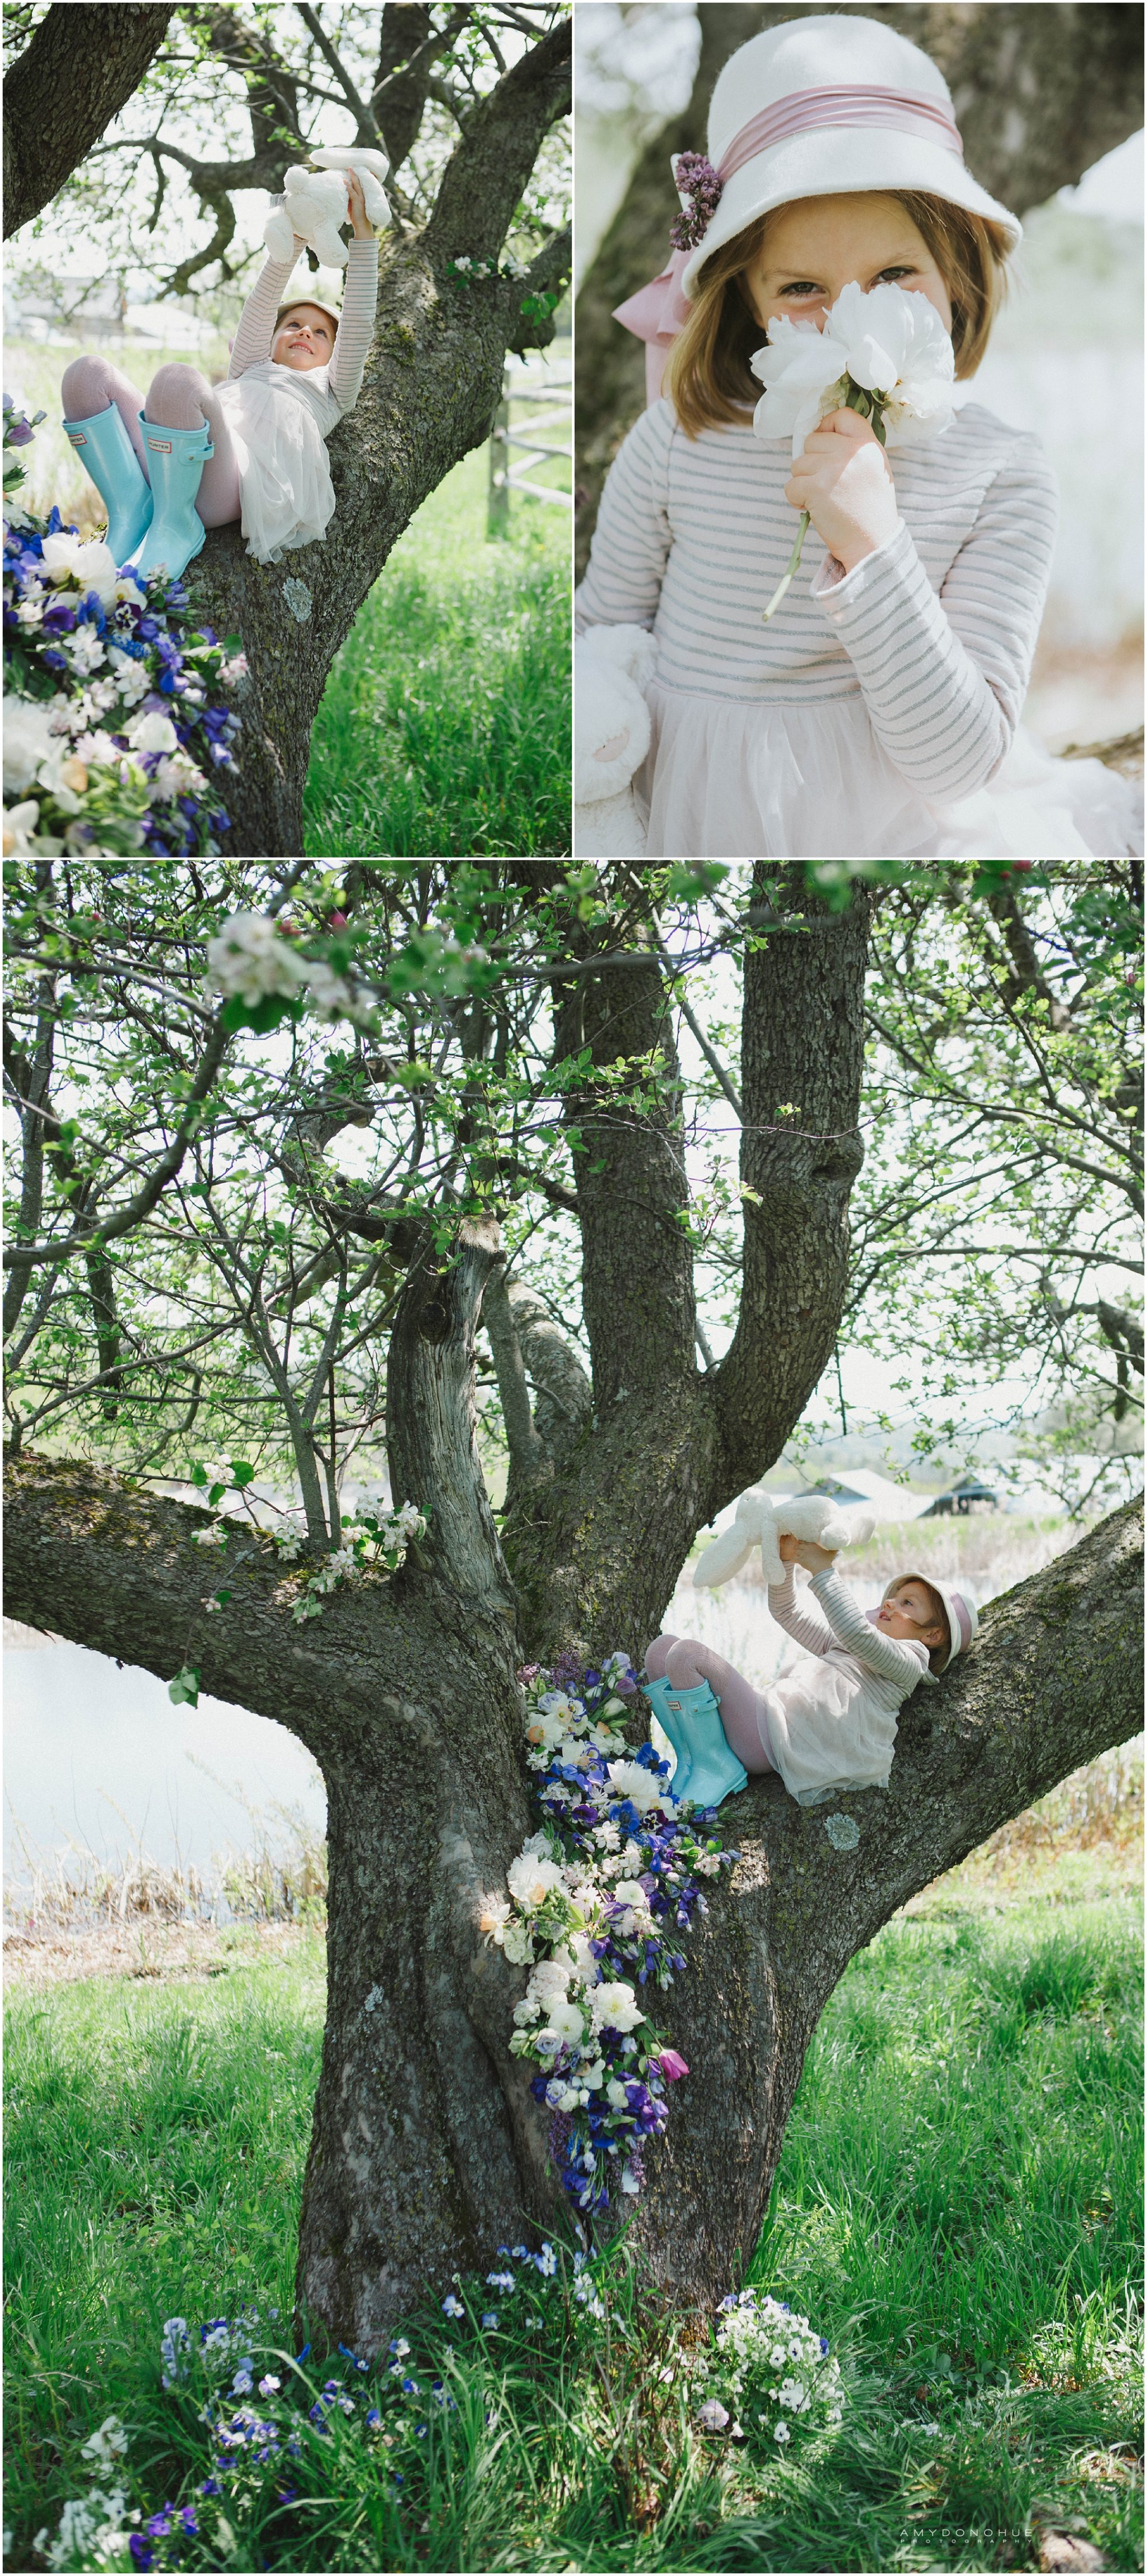 Vermont Editorial Photographer | © Amy Donohue Photography